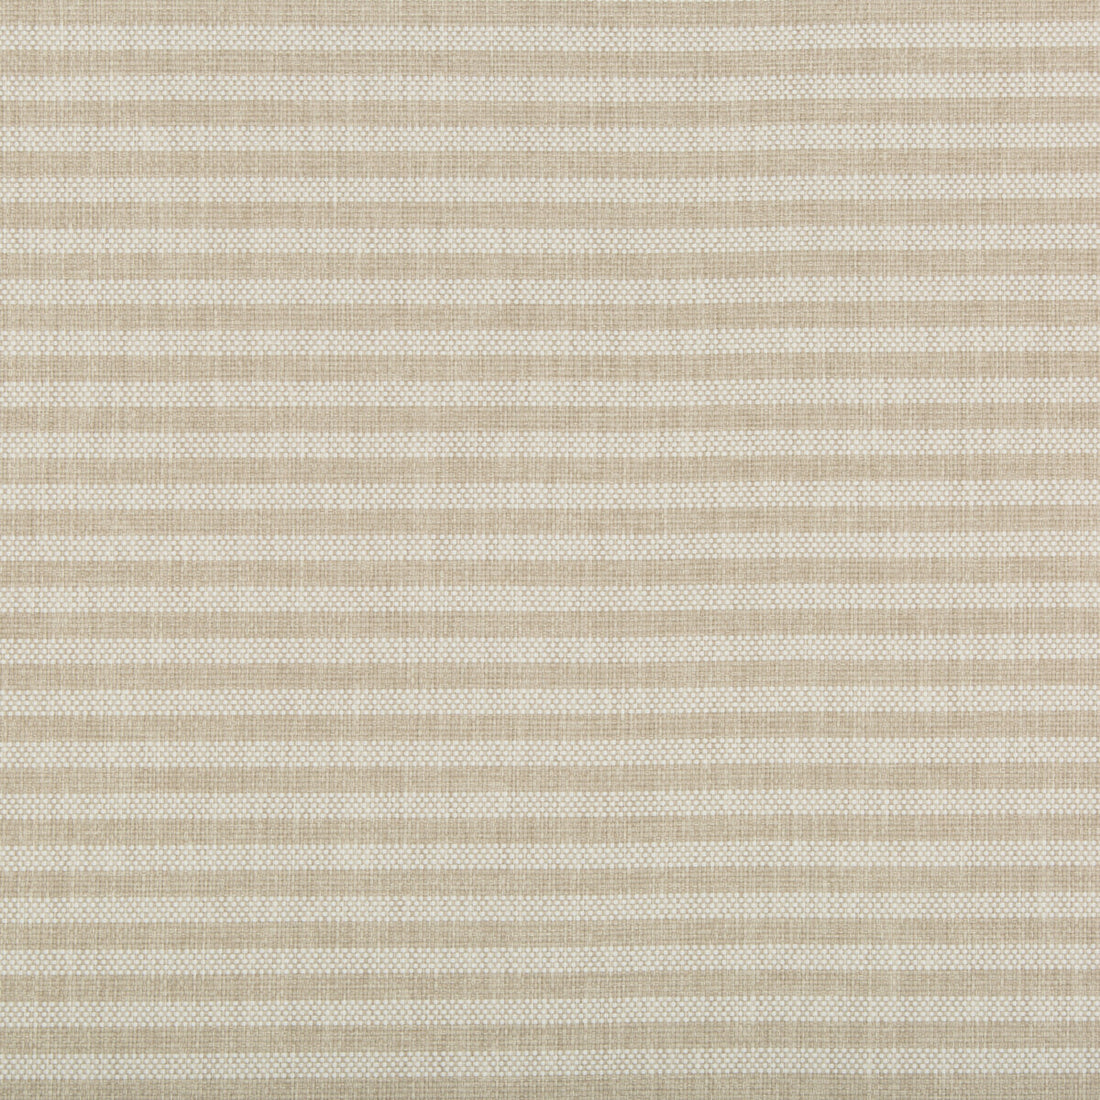 Rayas Stripe fabric in grain color - pattern GWF-3745.116.0 - by Lee Jofa Modern in the Kw Terra Firma II Indoor Outdoor collection